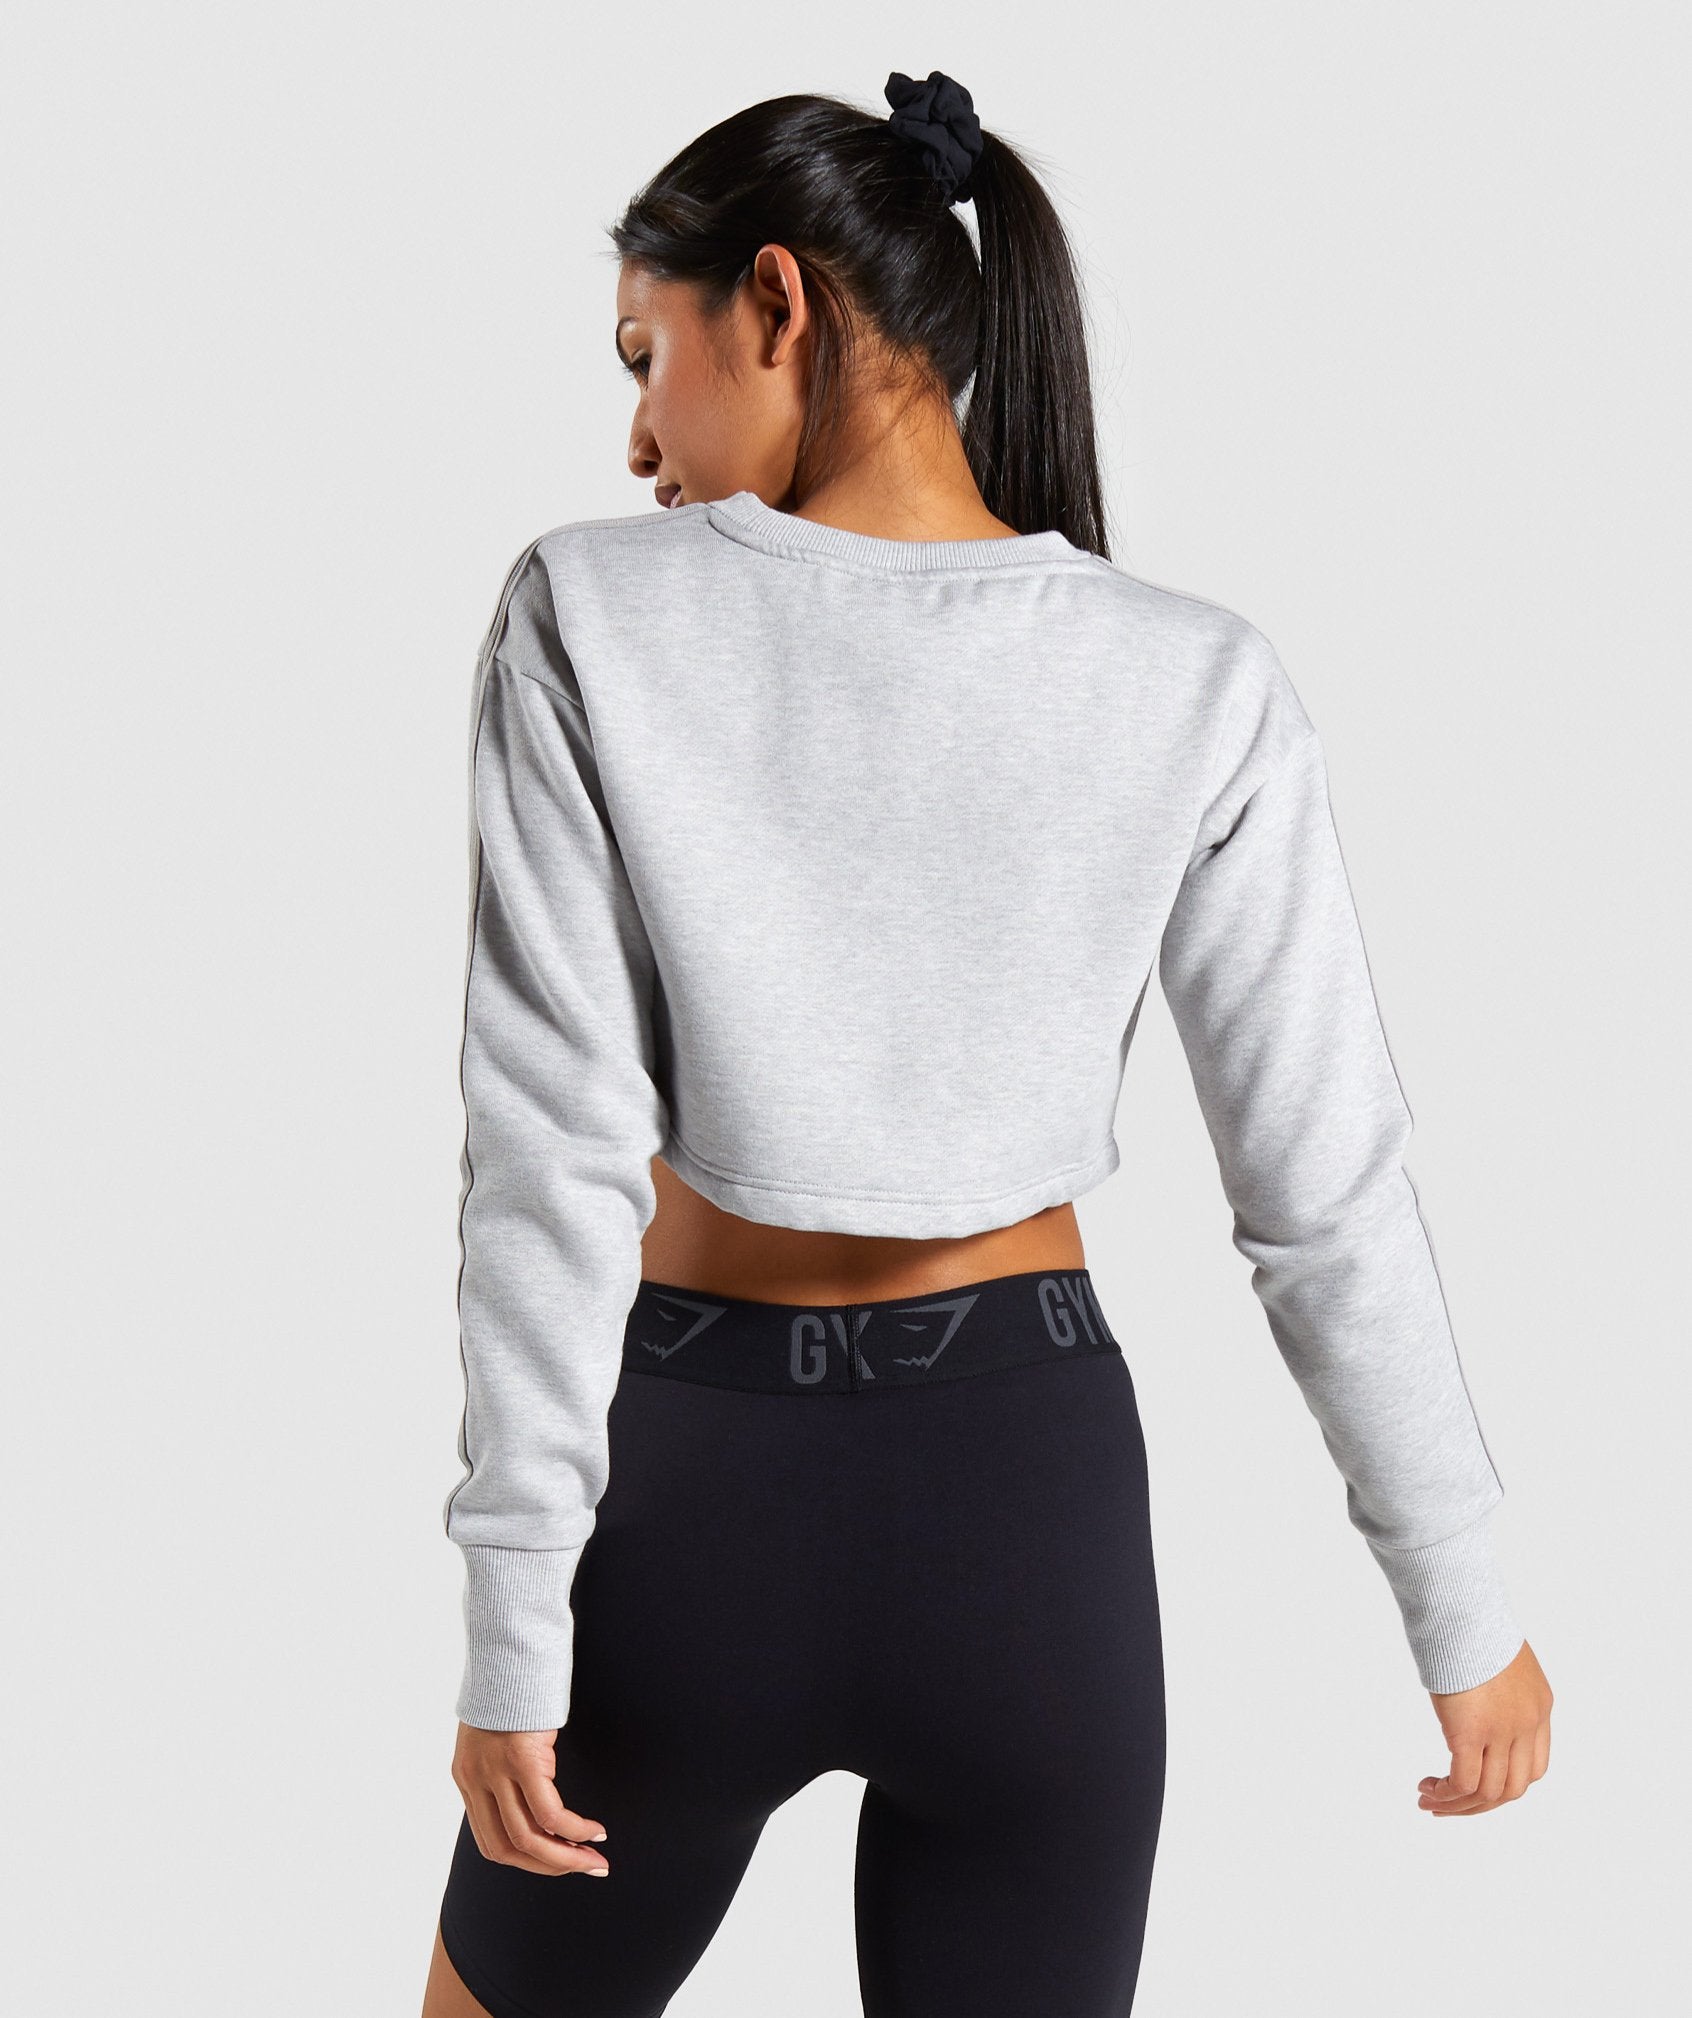 Legacy Fitness Sweater in Light Grey Marl - view 2